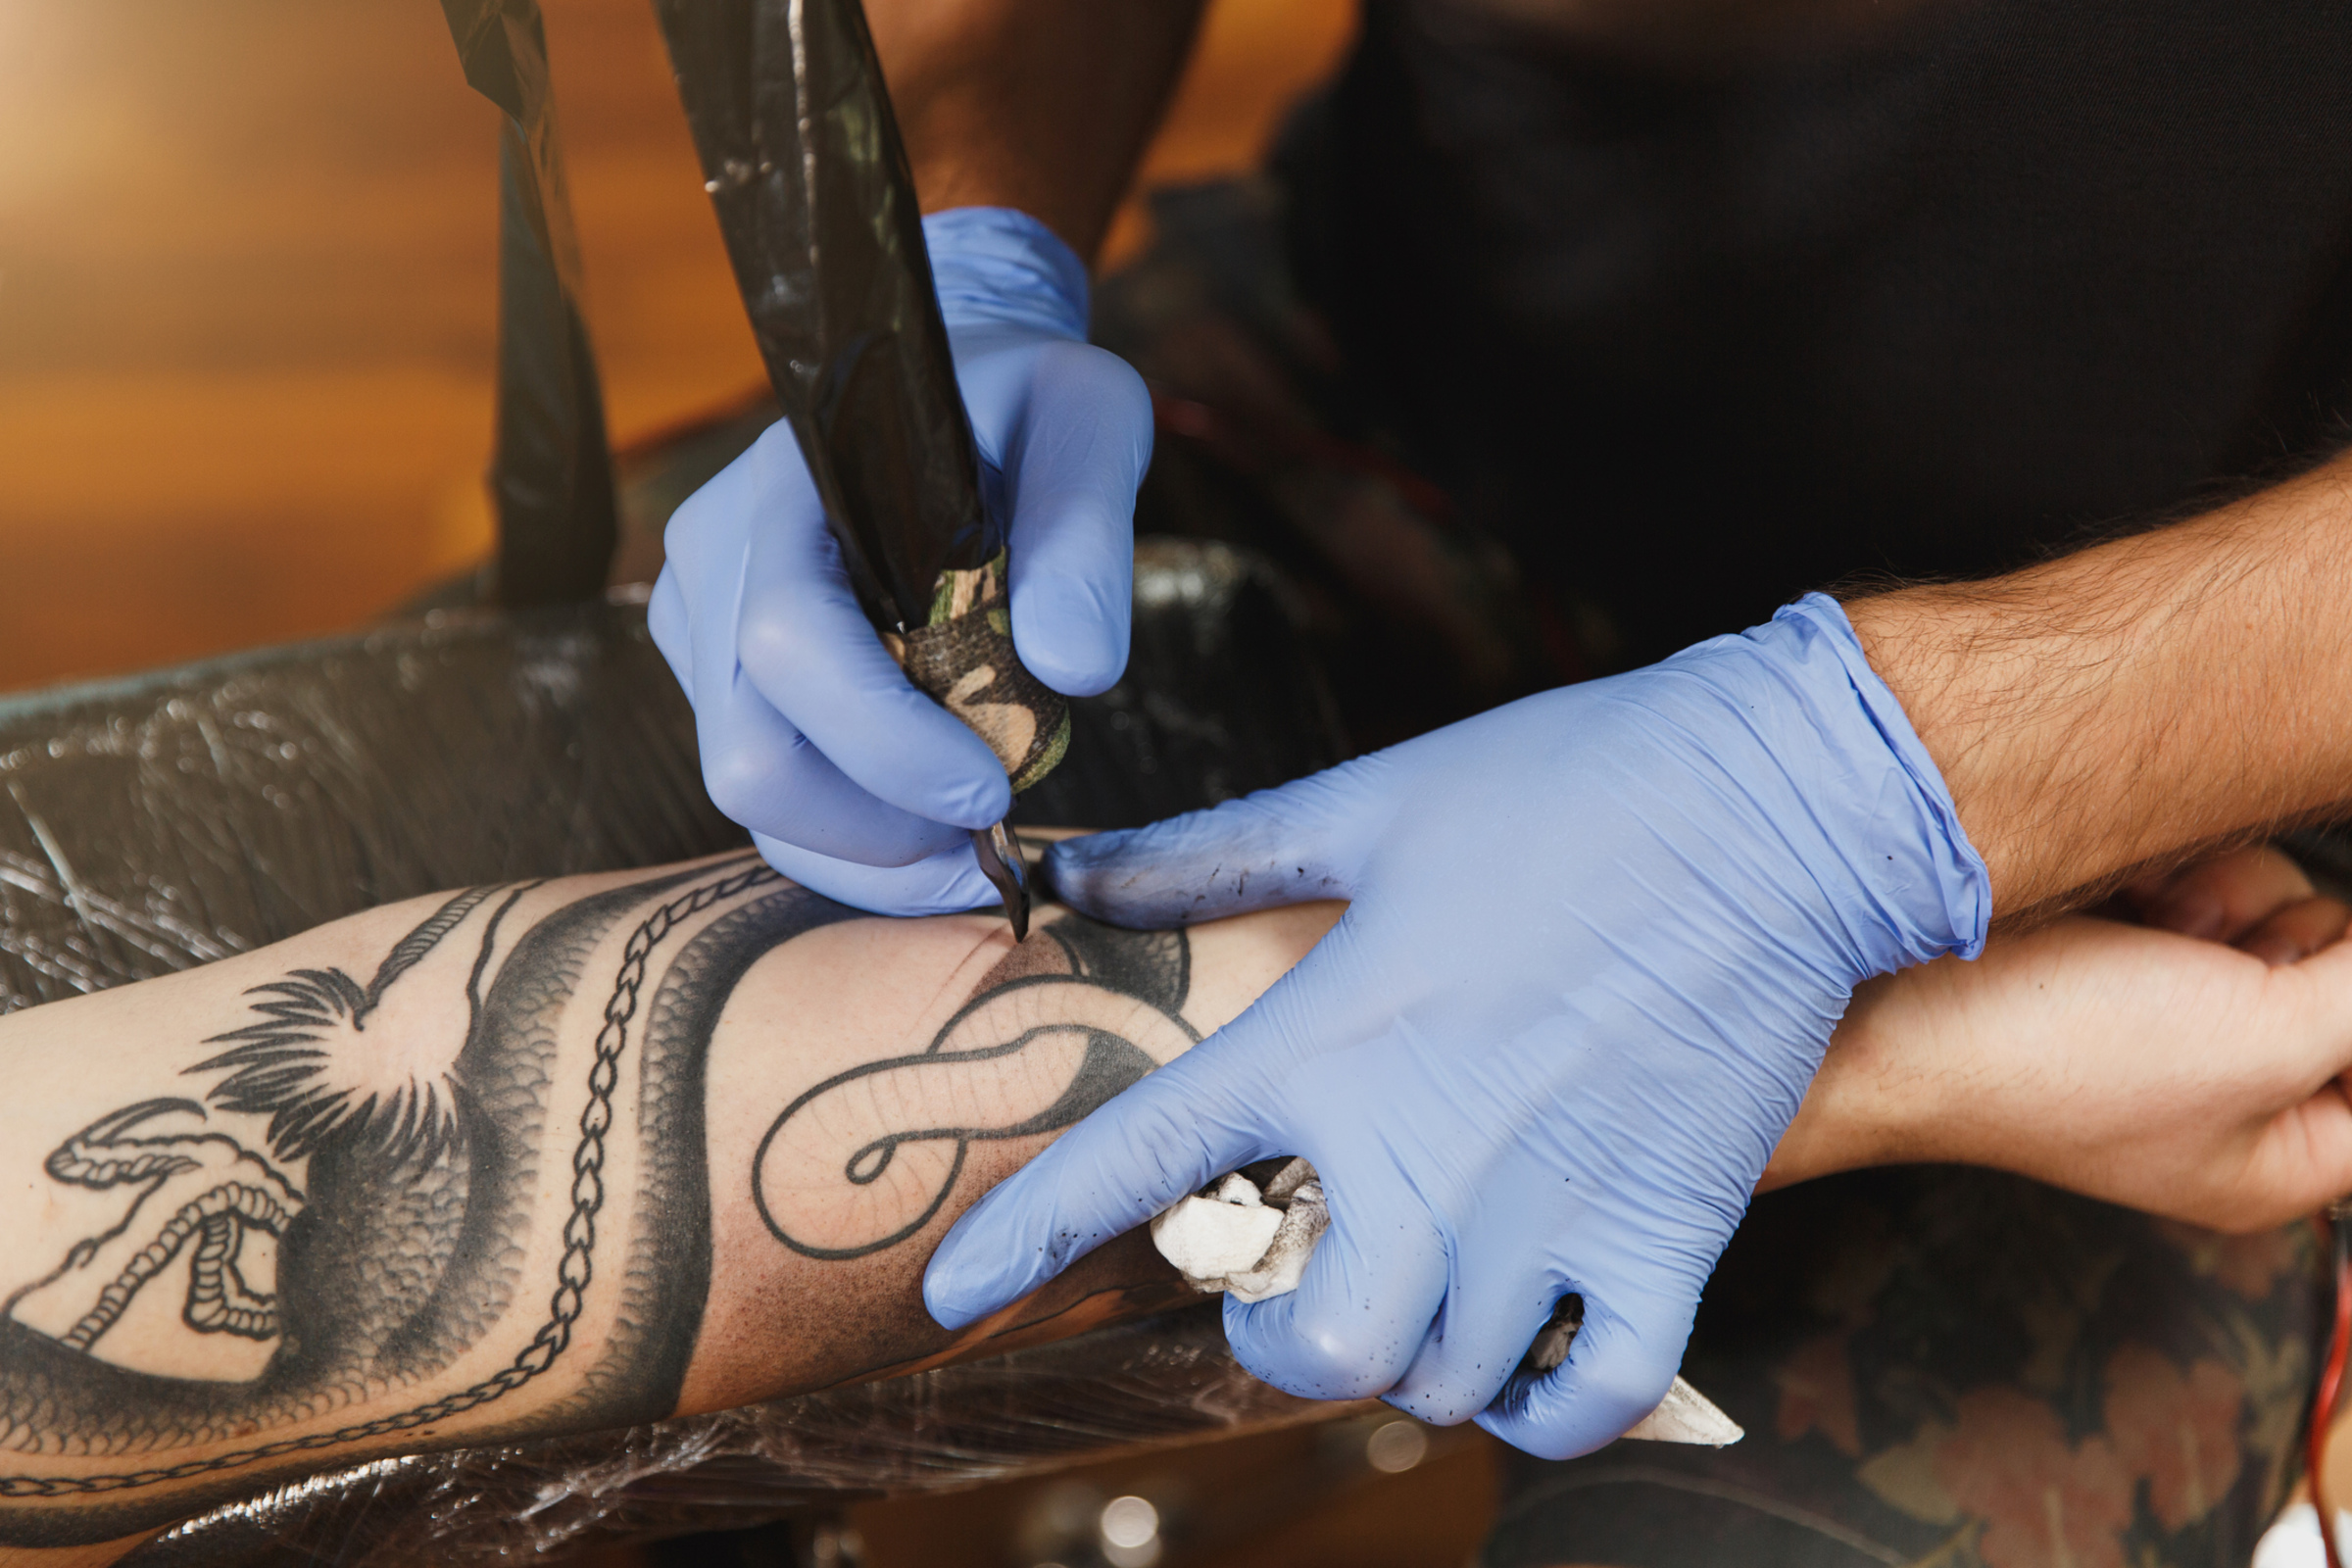 Considering a Sleeve Tattoo? Here's What Experts Think You Should Know